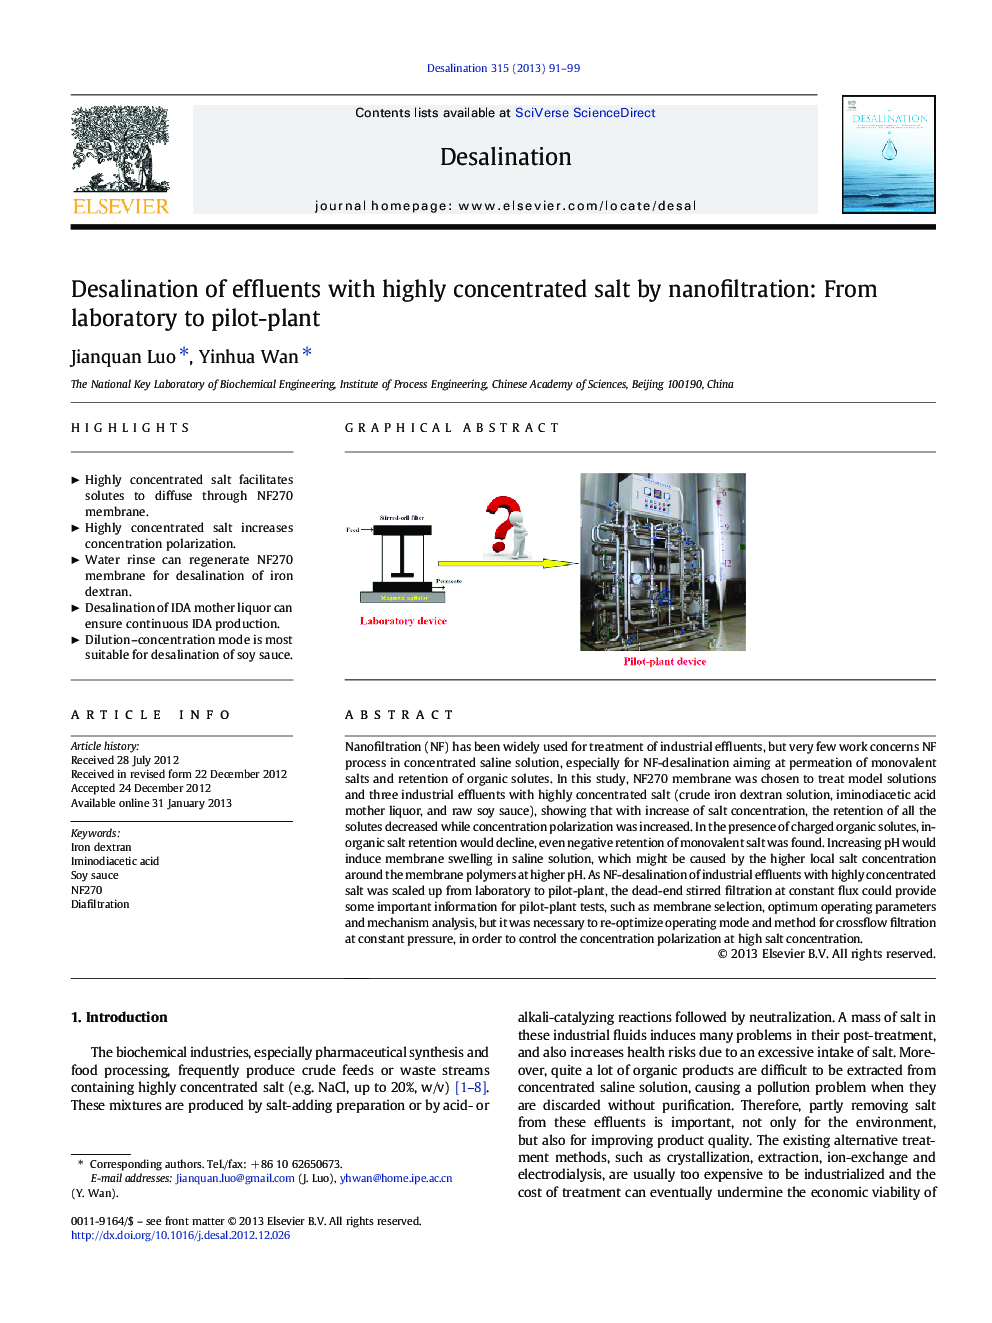 Desalination of effluents with highly concentrated salt by nanofiltration: From laboratory to pilot-plant